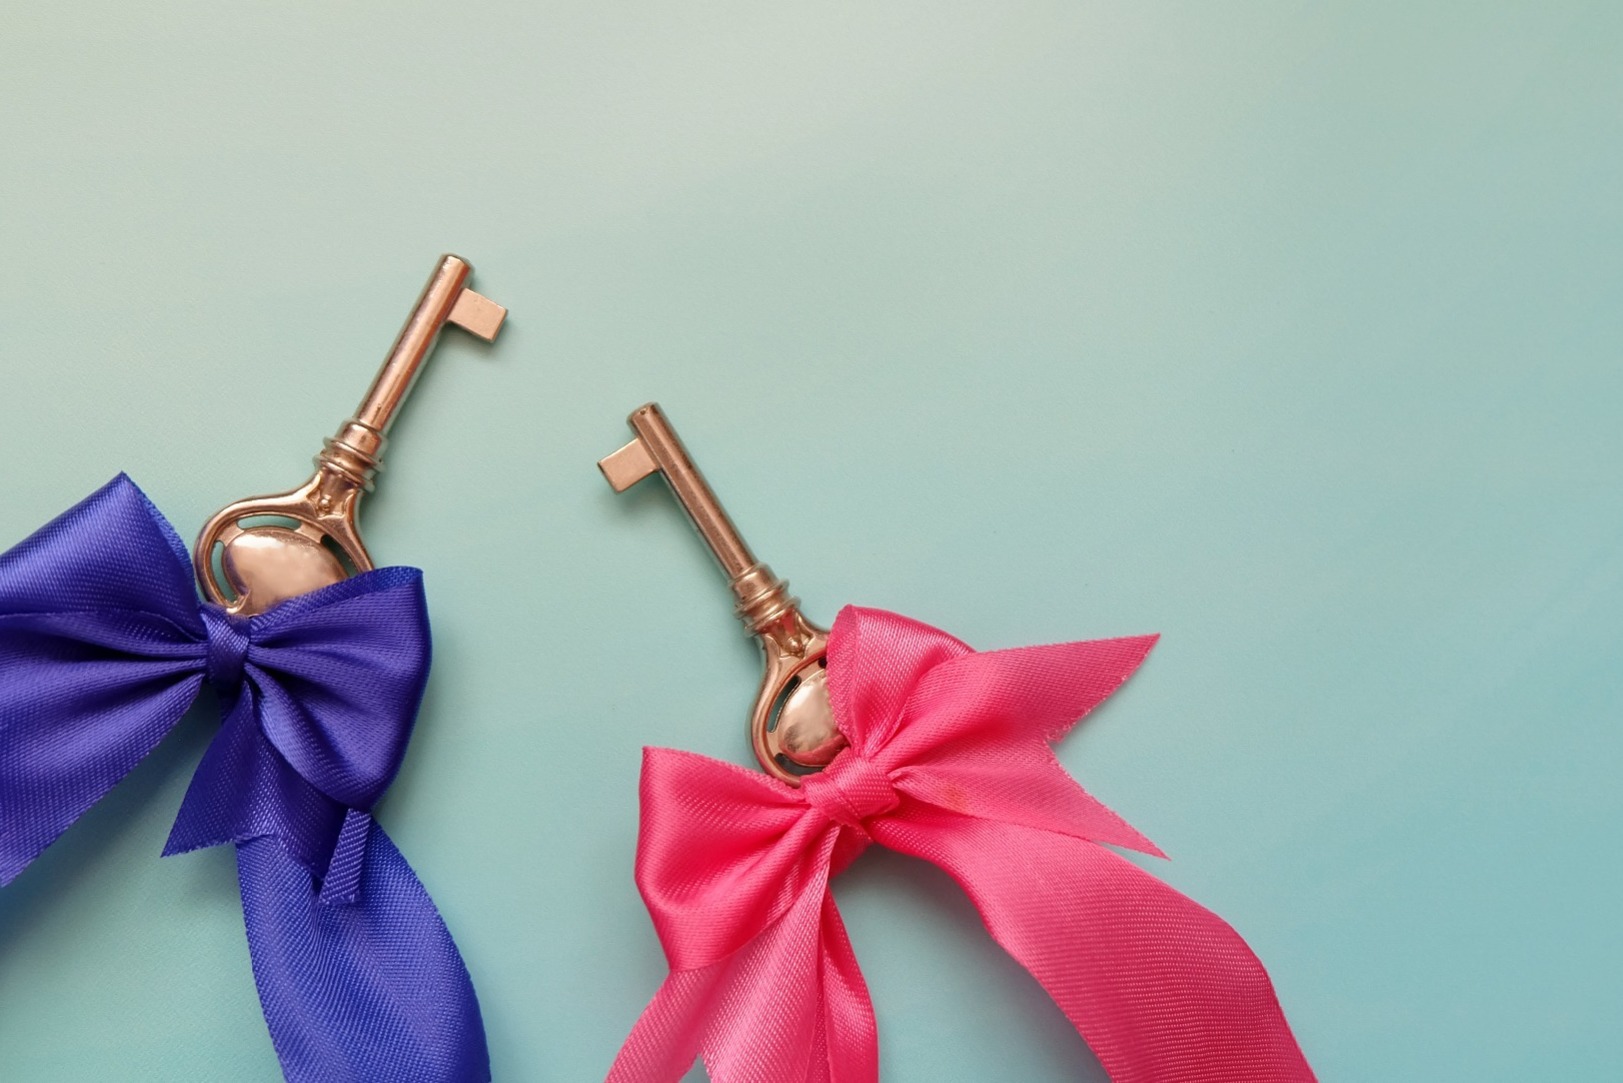 Two keys for a property, each with a different coloured ribbon tied on.